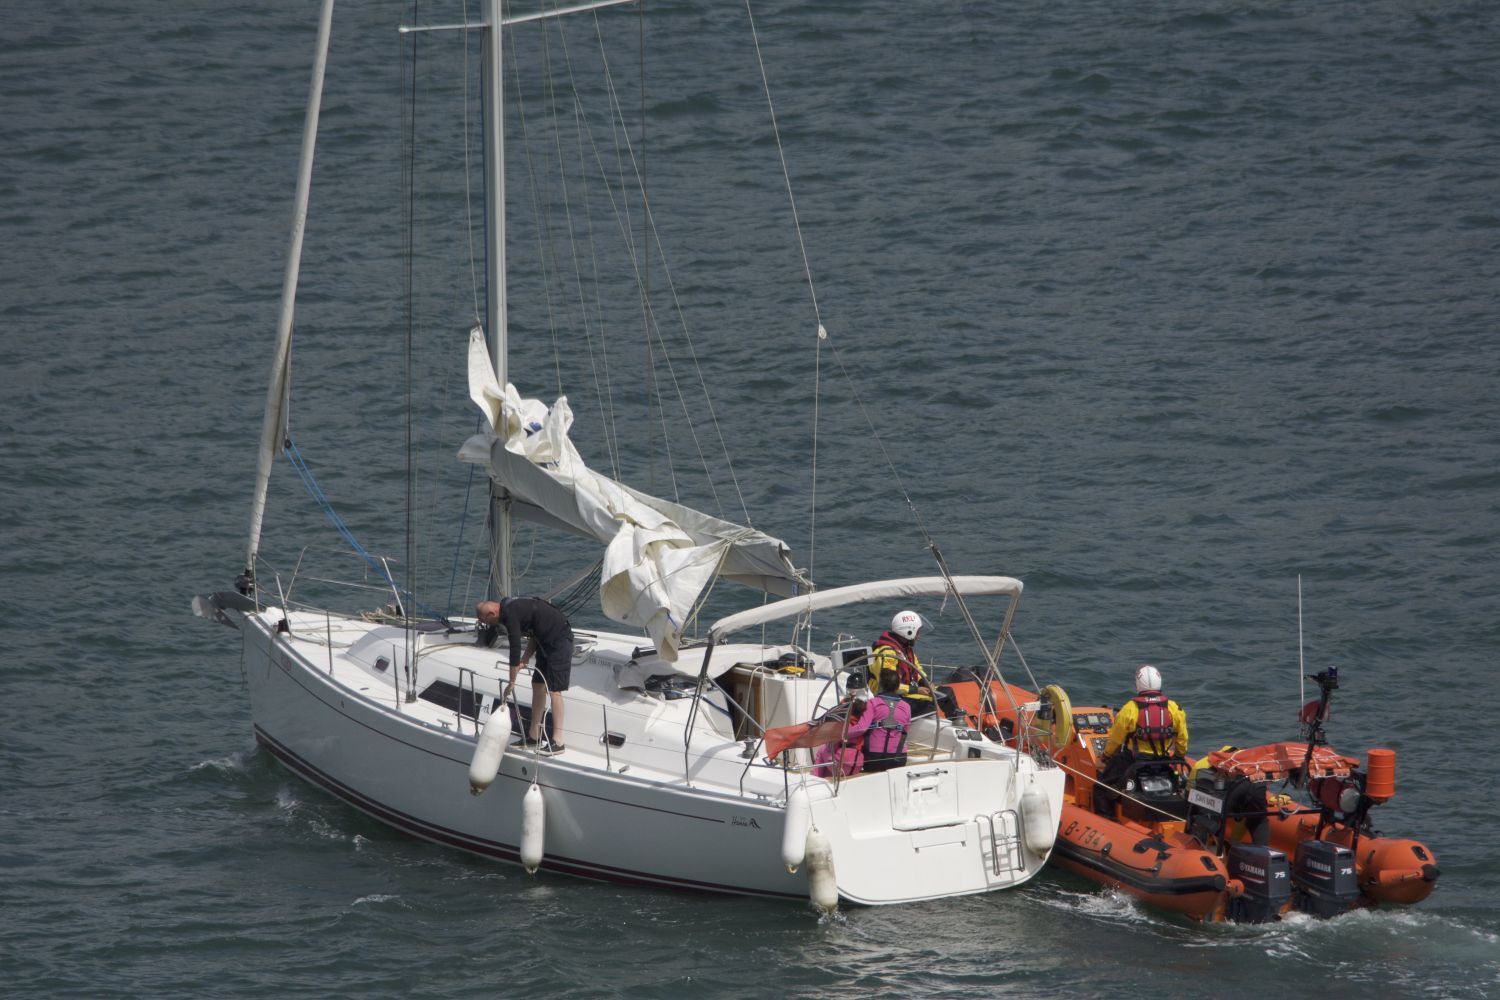 37ft yacht under tow after having been plucked from the rocks